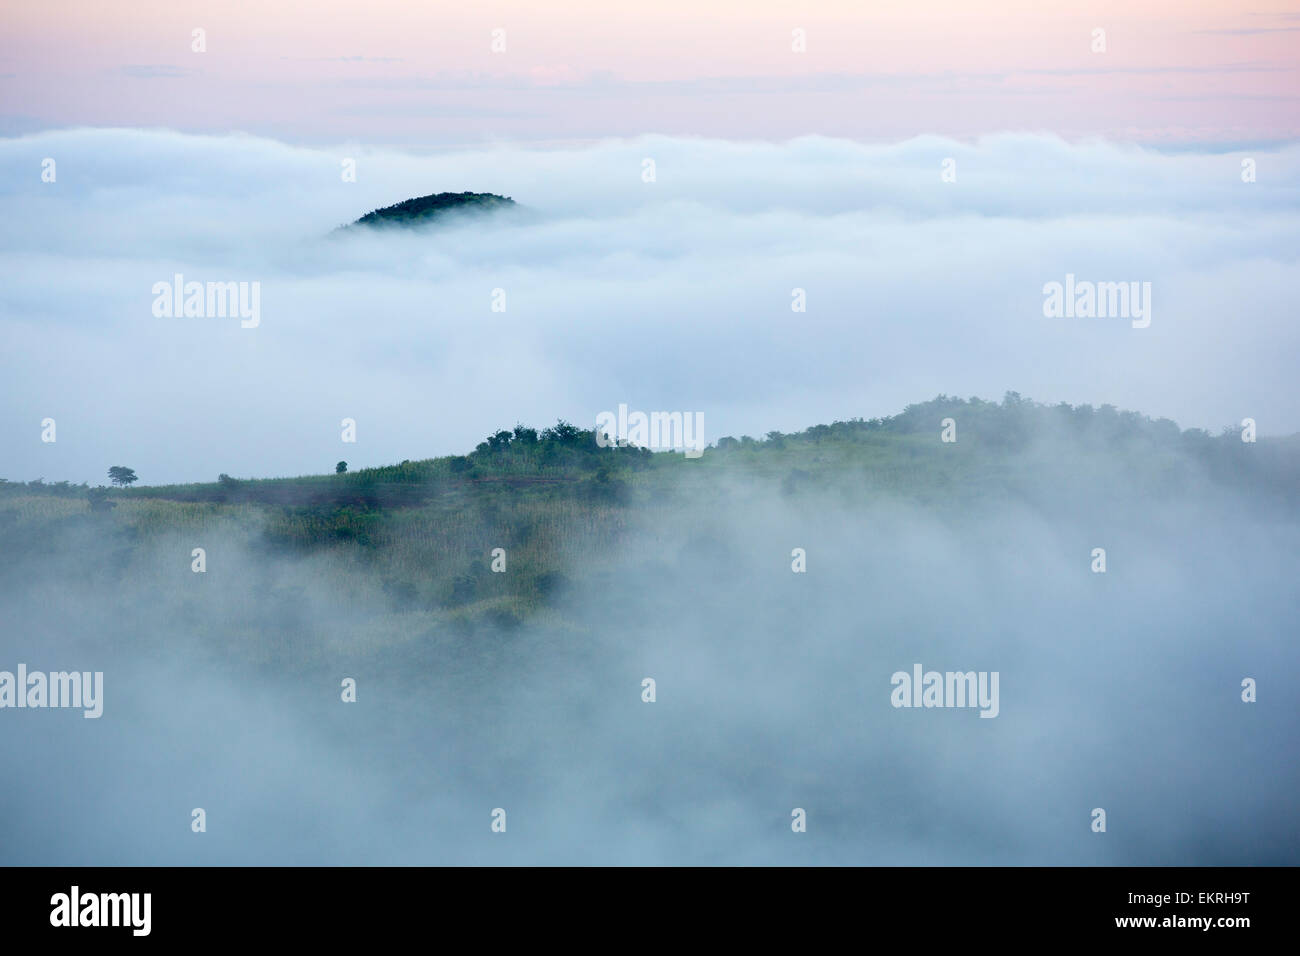 Morning Mist spilling down from the plateau into the lower shire river valley in Malawi, Africa. Stock Photo